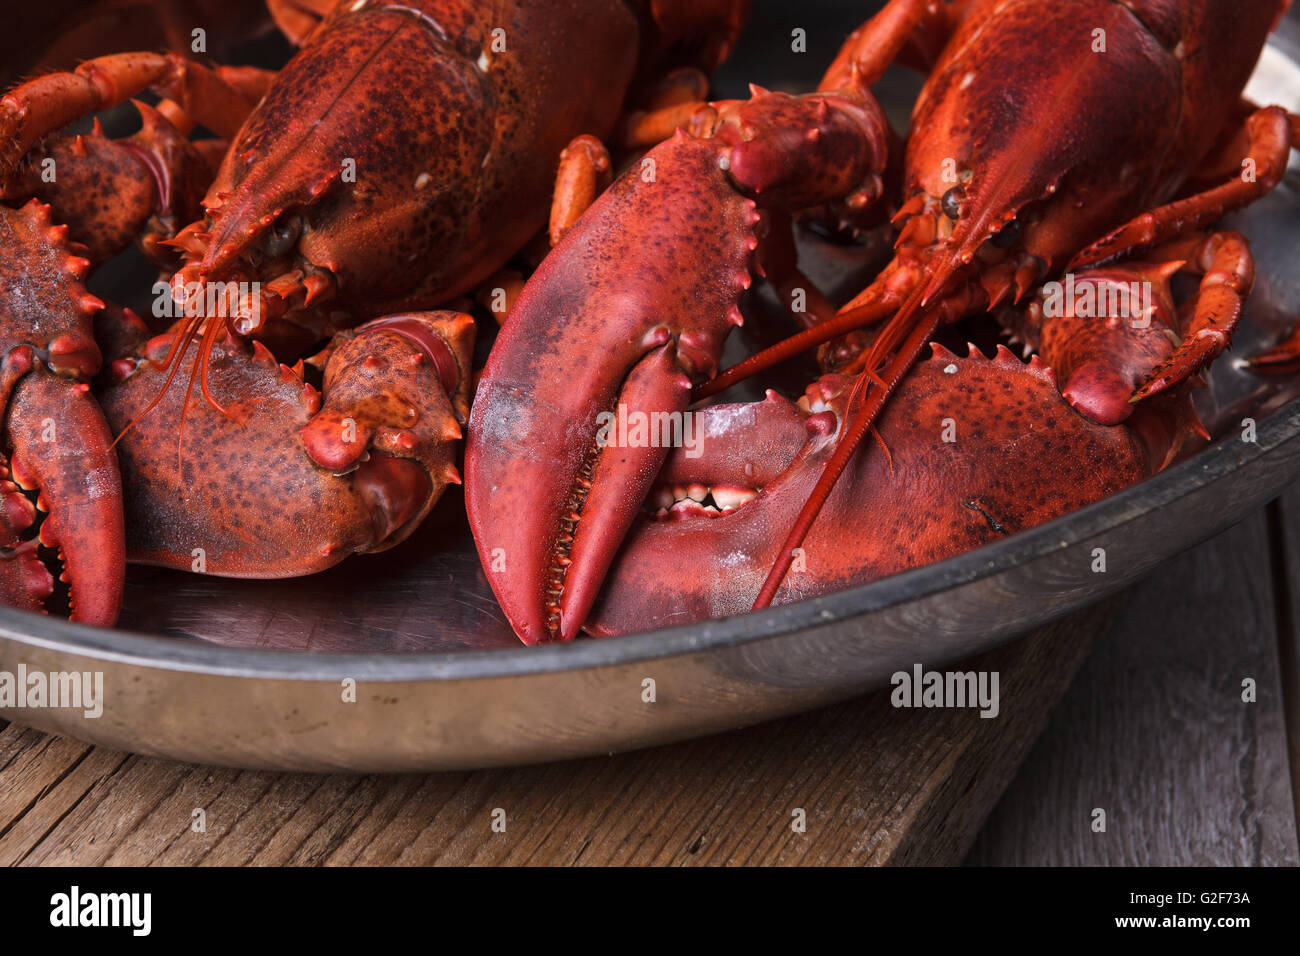 Freshly cooked lobsters served whole for dinner Stock Photo